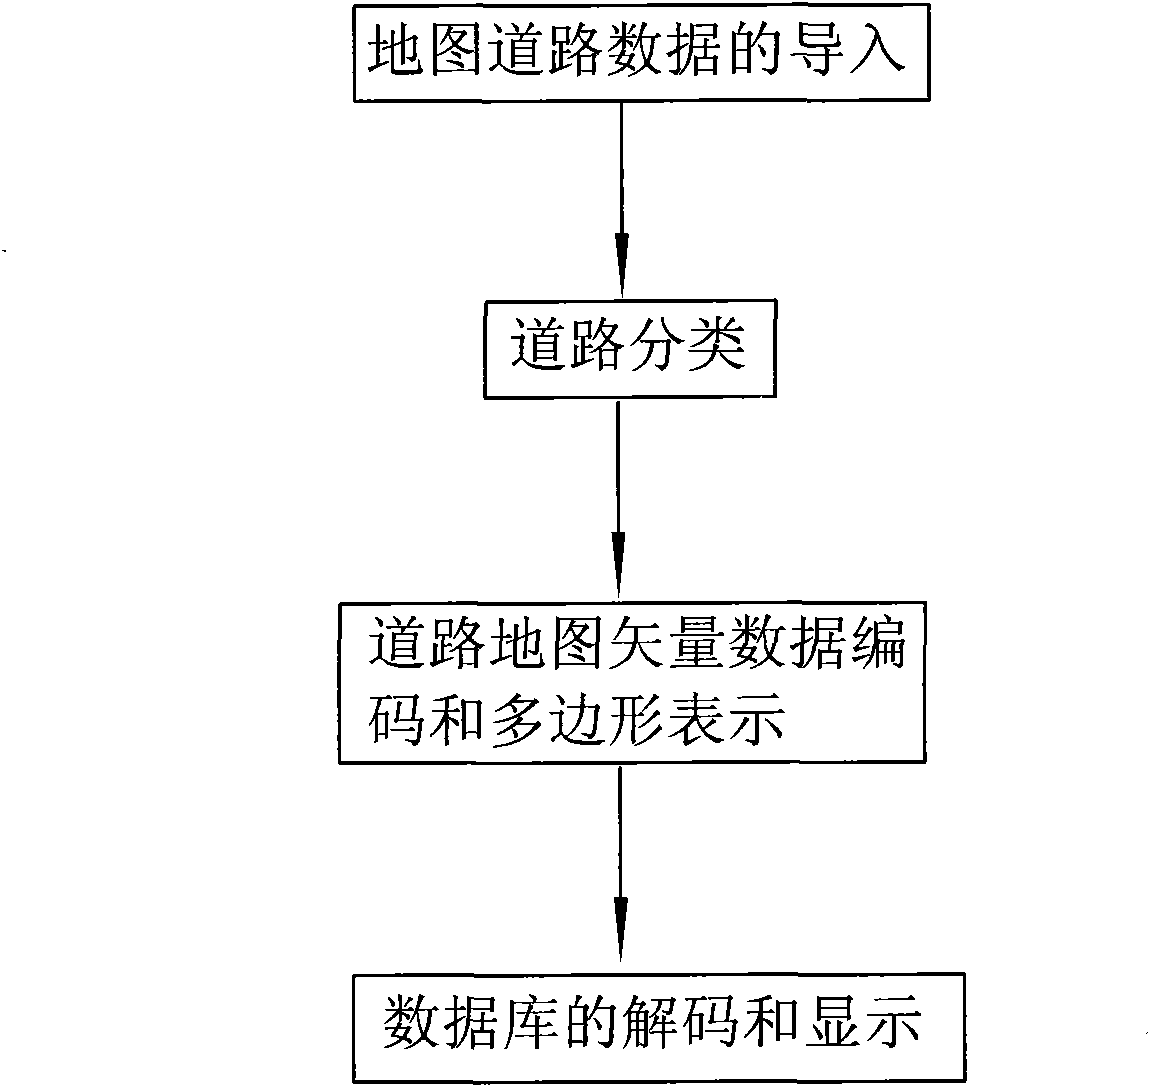 Method for expressing processing of roads on map